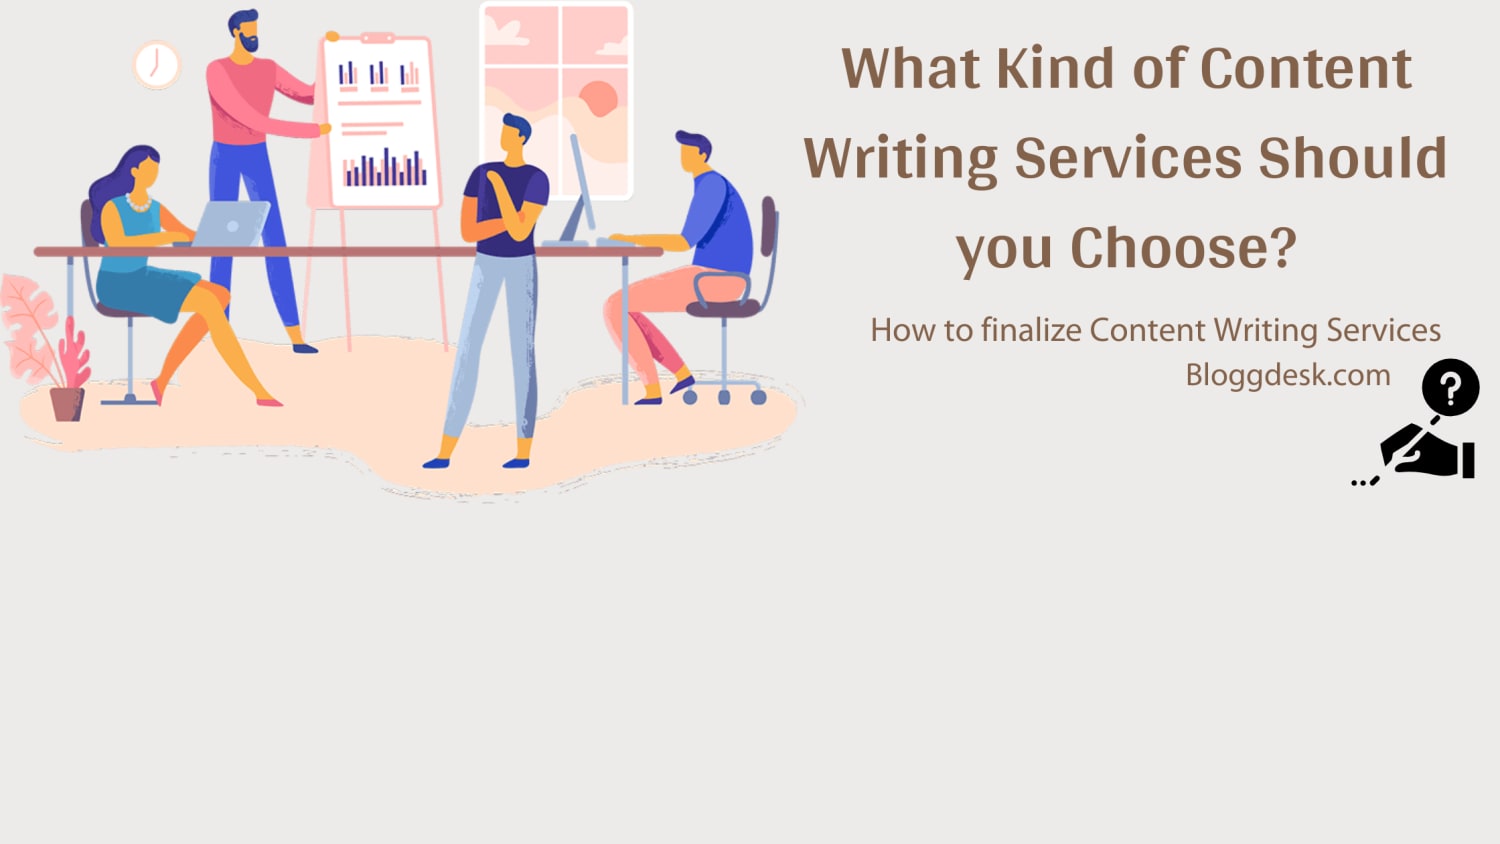 What Kind of Content Writing Services Should you Choose?